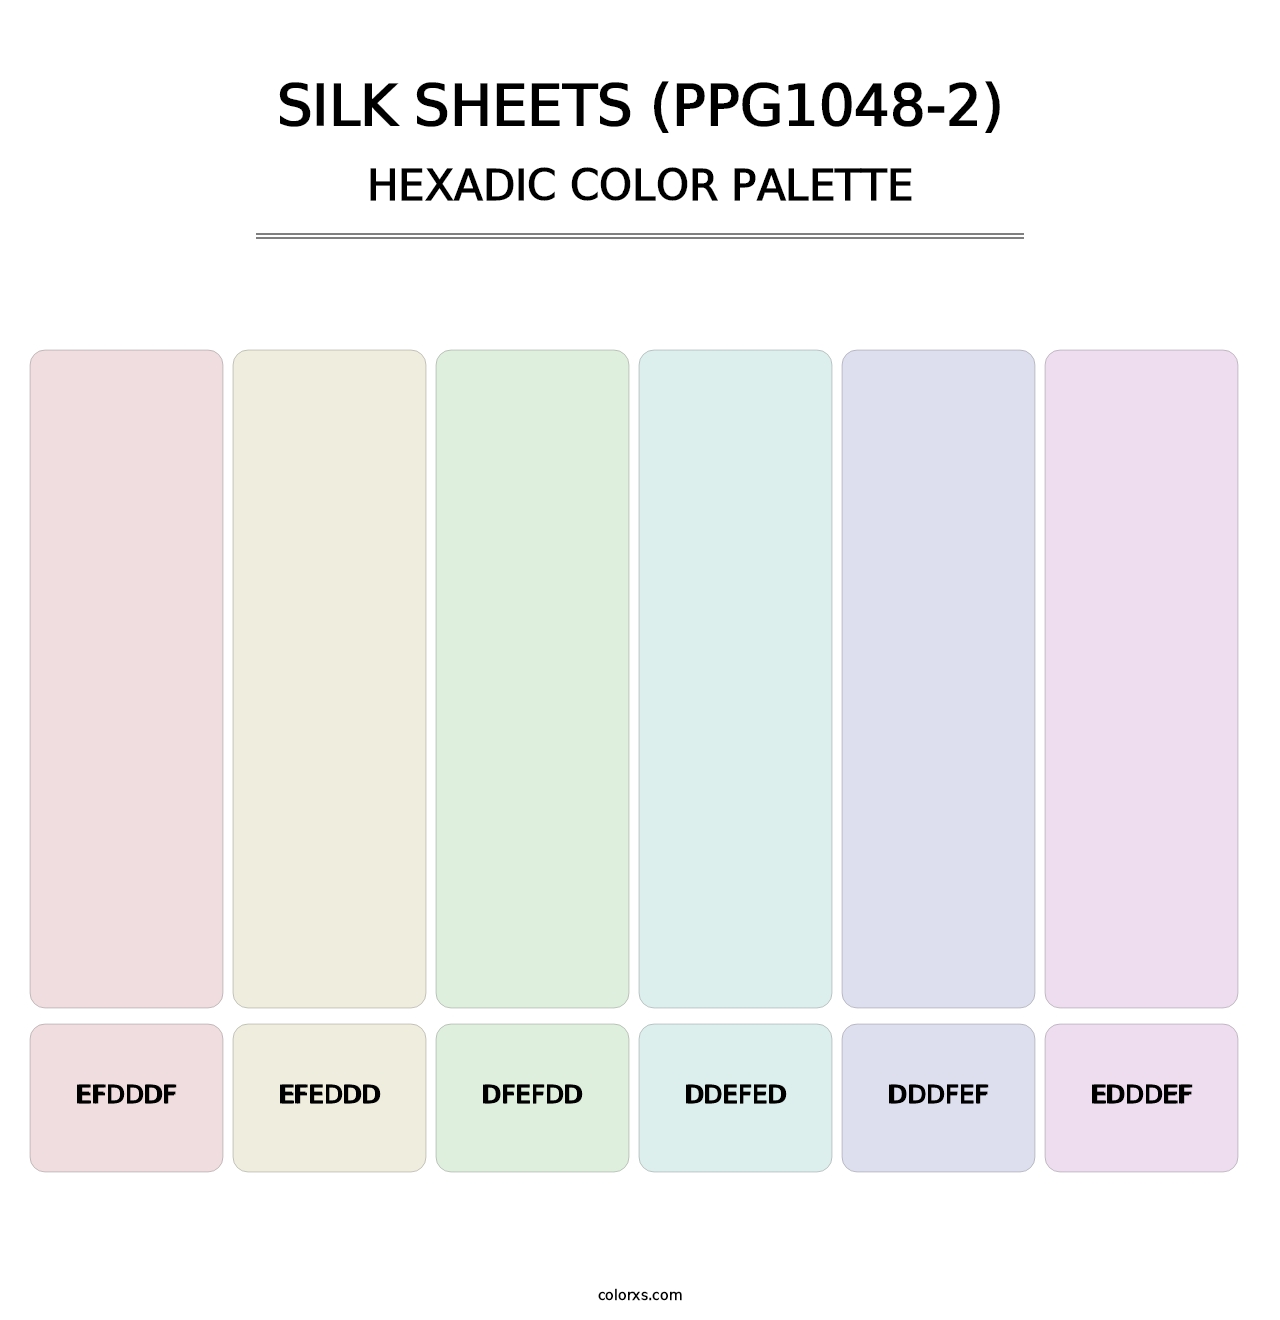 Silk Sheets (PPG1048-2) - Hexadic Color Palette